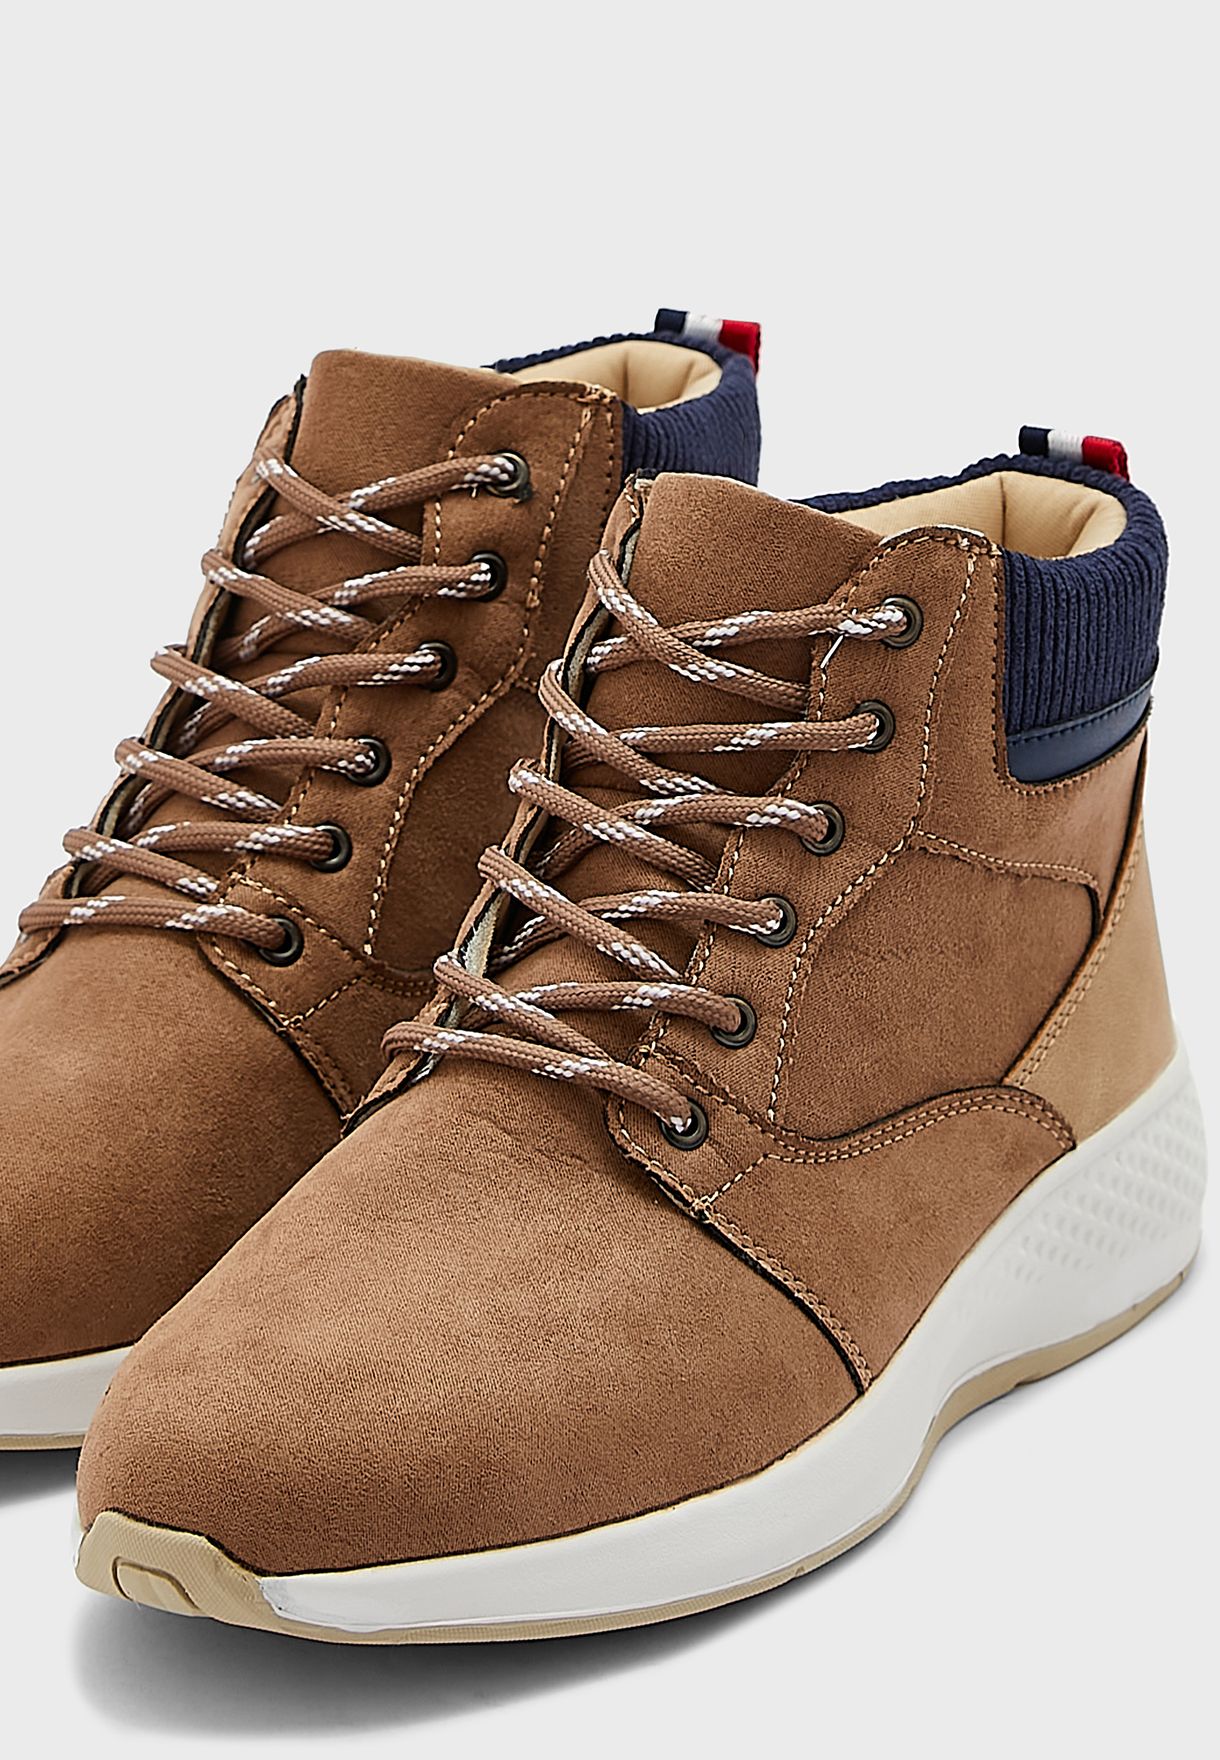 Webbing Detail Casual Faux Suede Boots